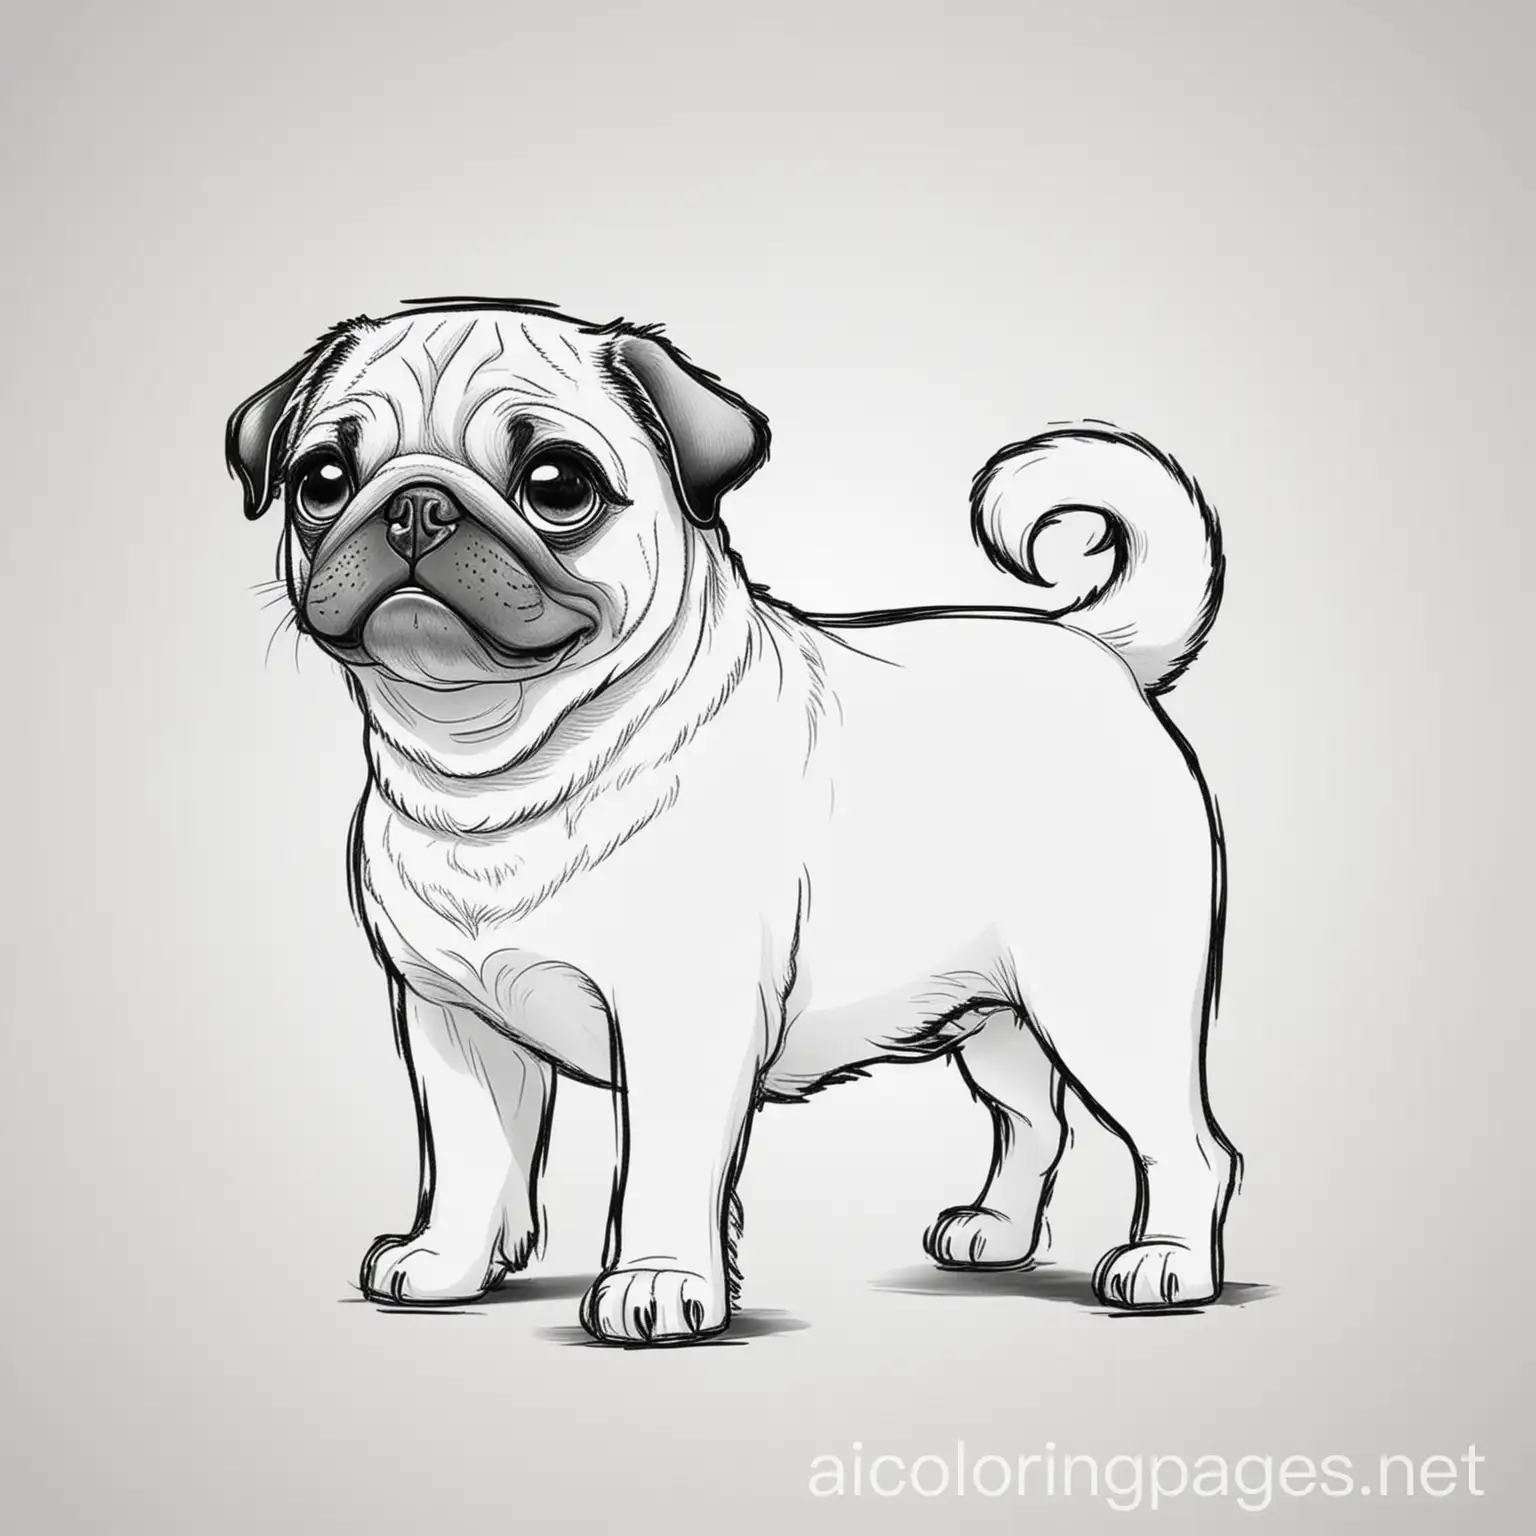 Pug wagging tail, Coloring Page, black and white, line art, white background, Simplicity, Ample White Space. The background of the coloring page is plain white to make it easy for young children to color within the lines. The outlines of all the subjects are easy to distinguish, making it simple for kids to color without too much difficulty